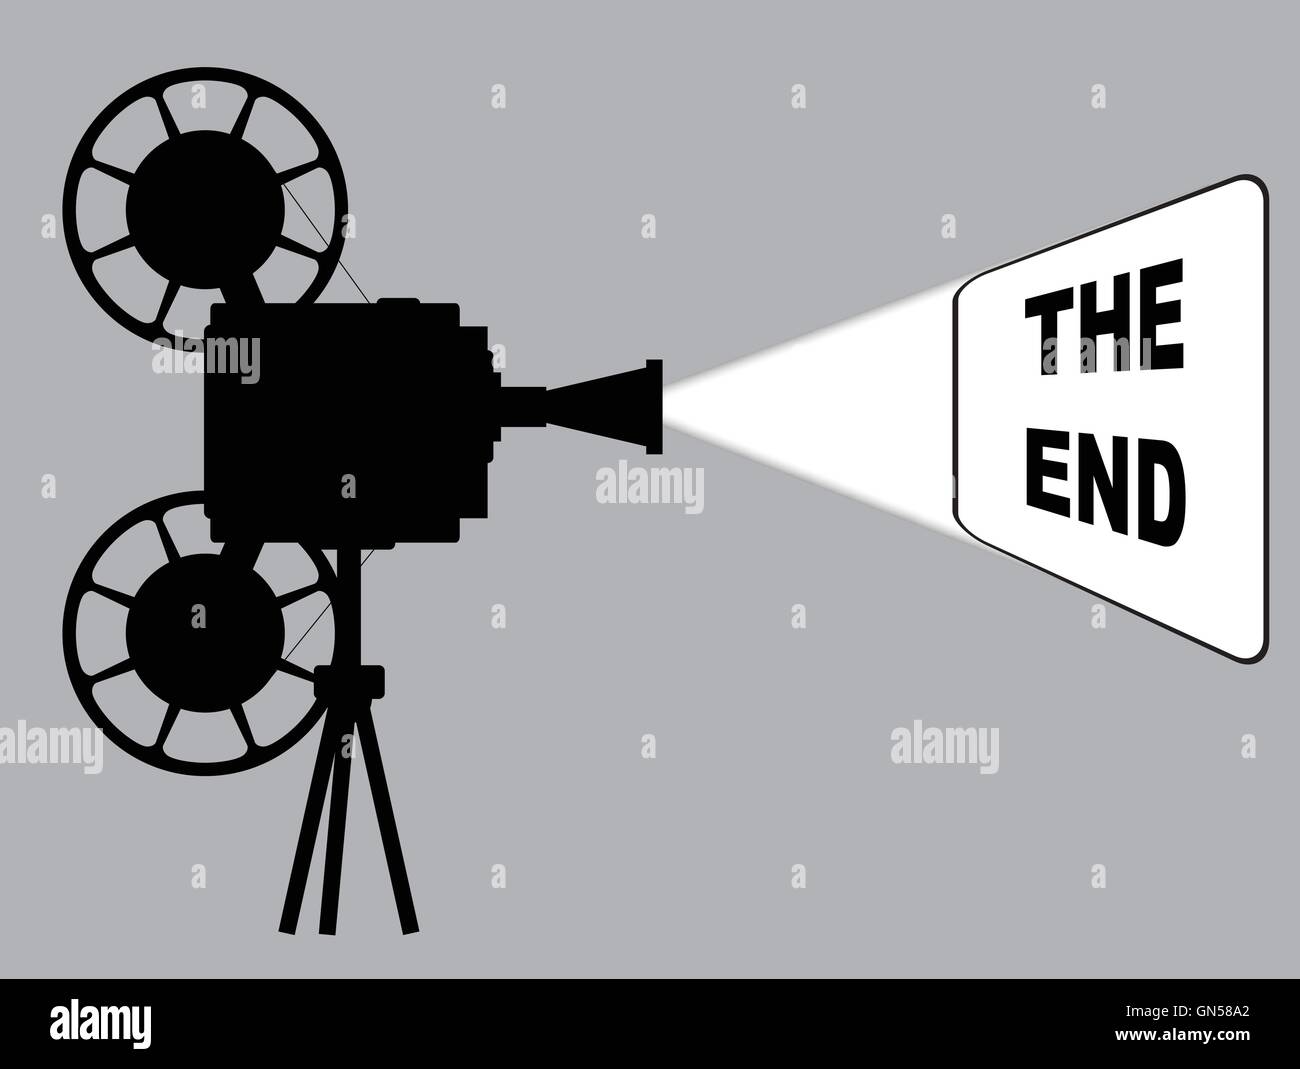 Movie Cine Projector The End Stock Vector